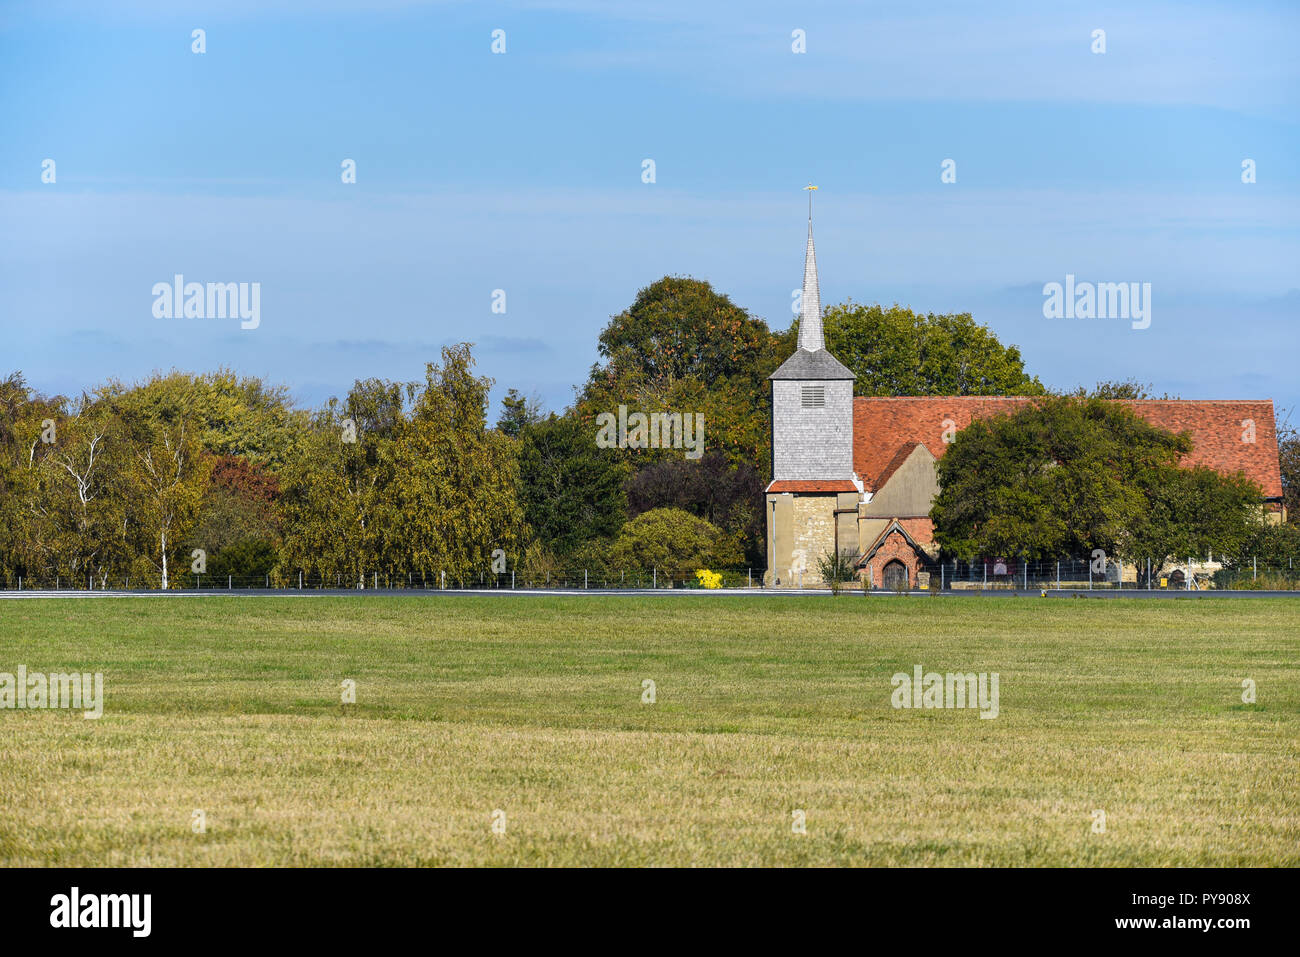 St Laurence and All Saints church on the edge of the runway at London Southend Airport, Eastwood, Essex, UK Stock Photo